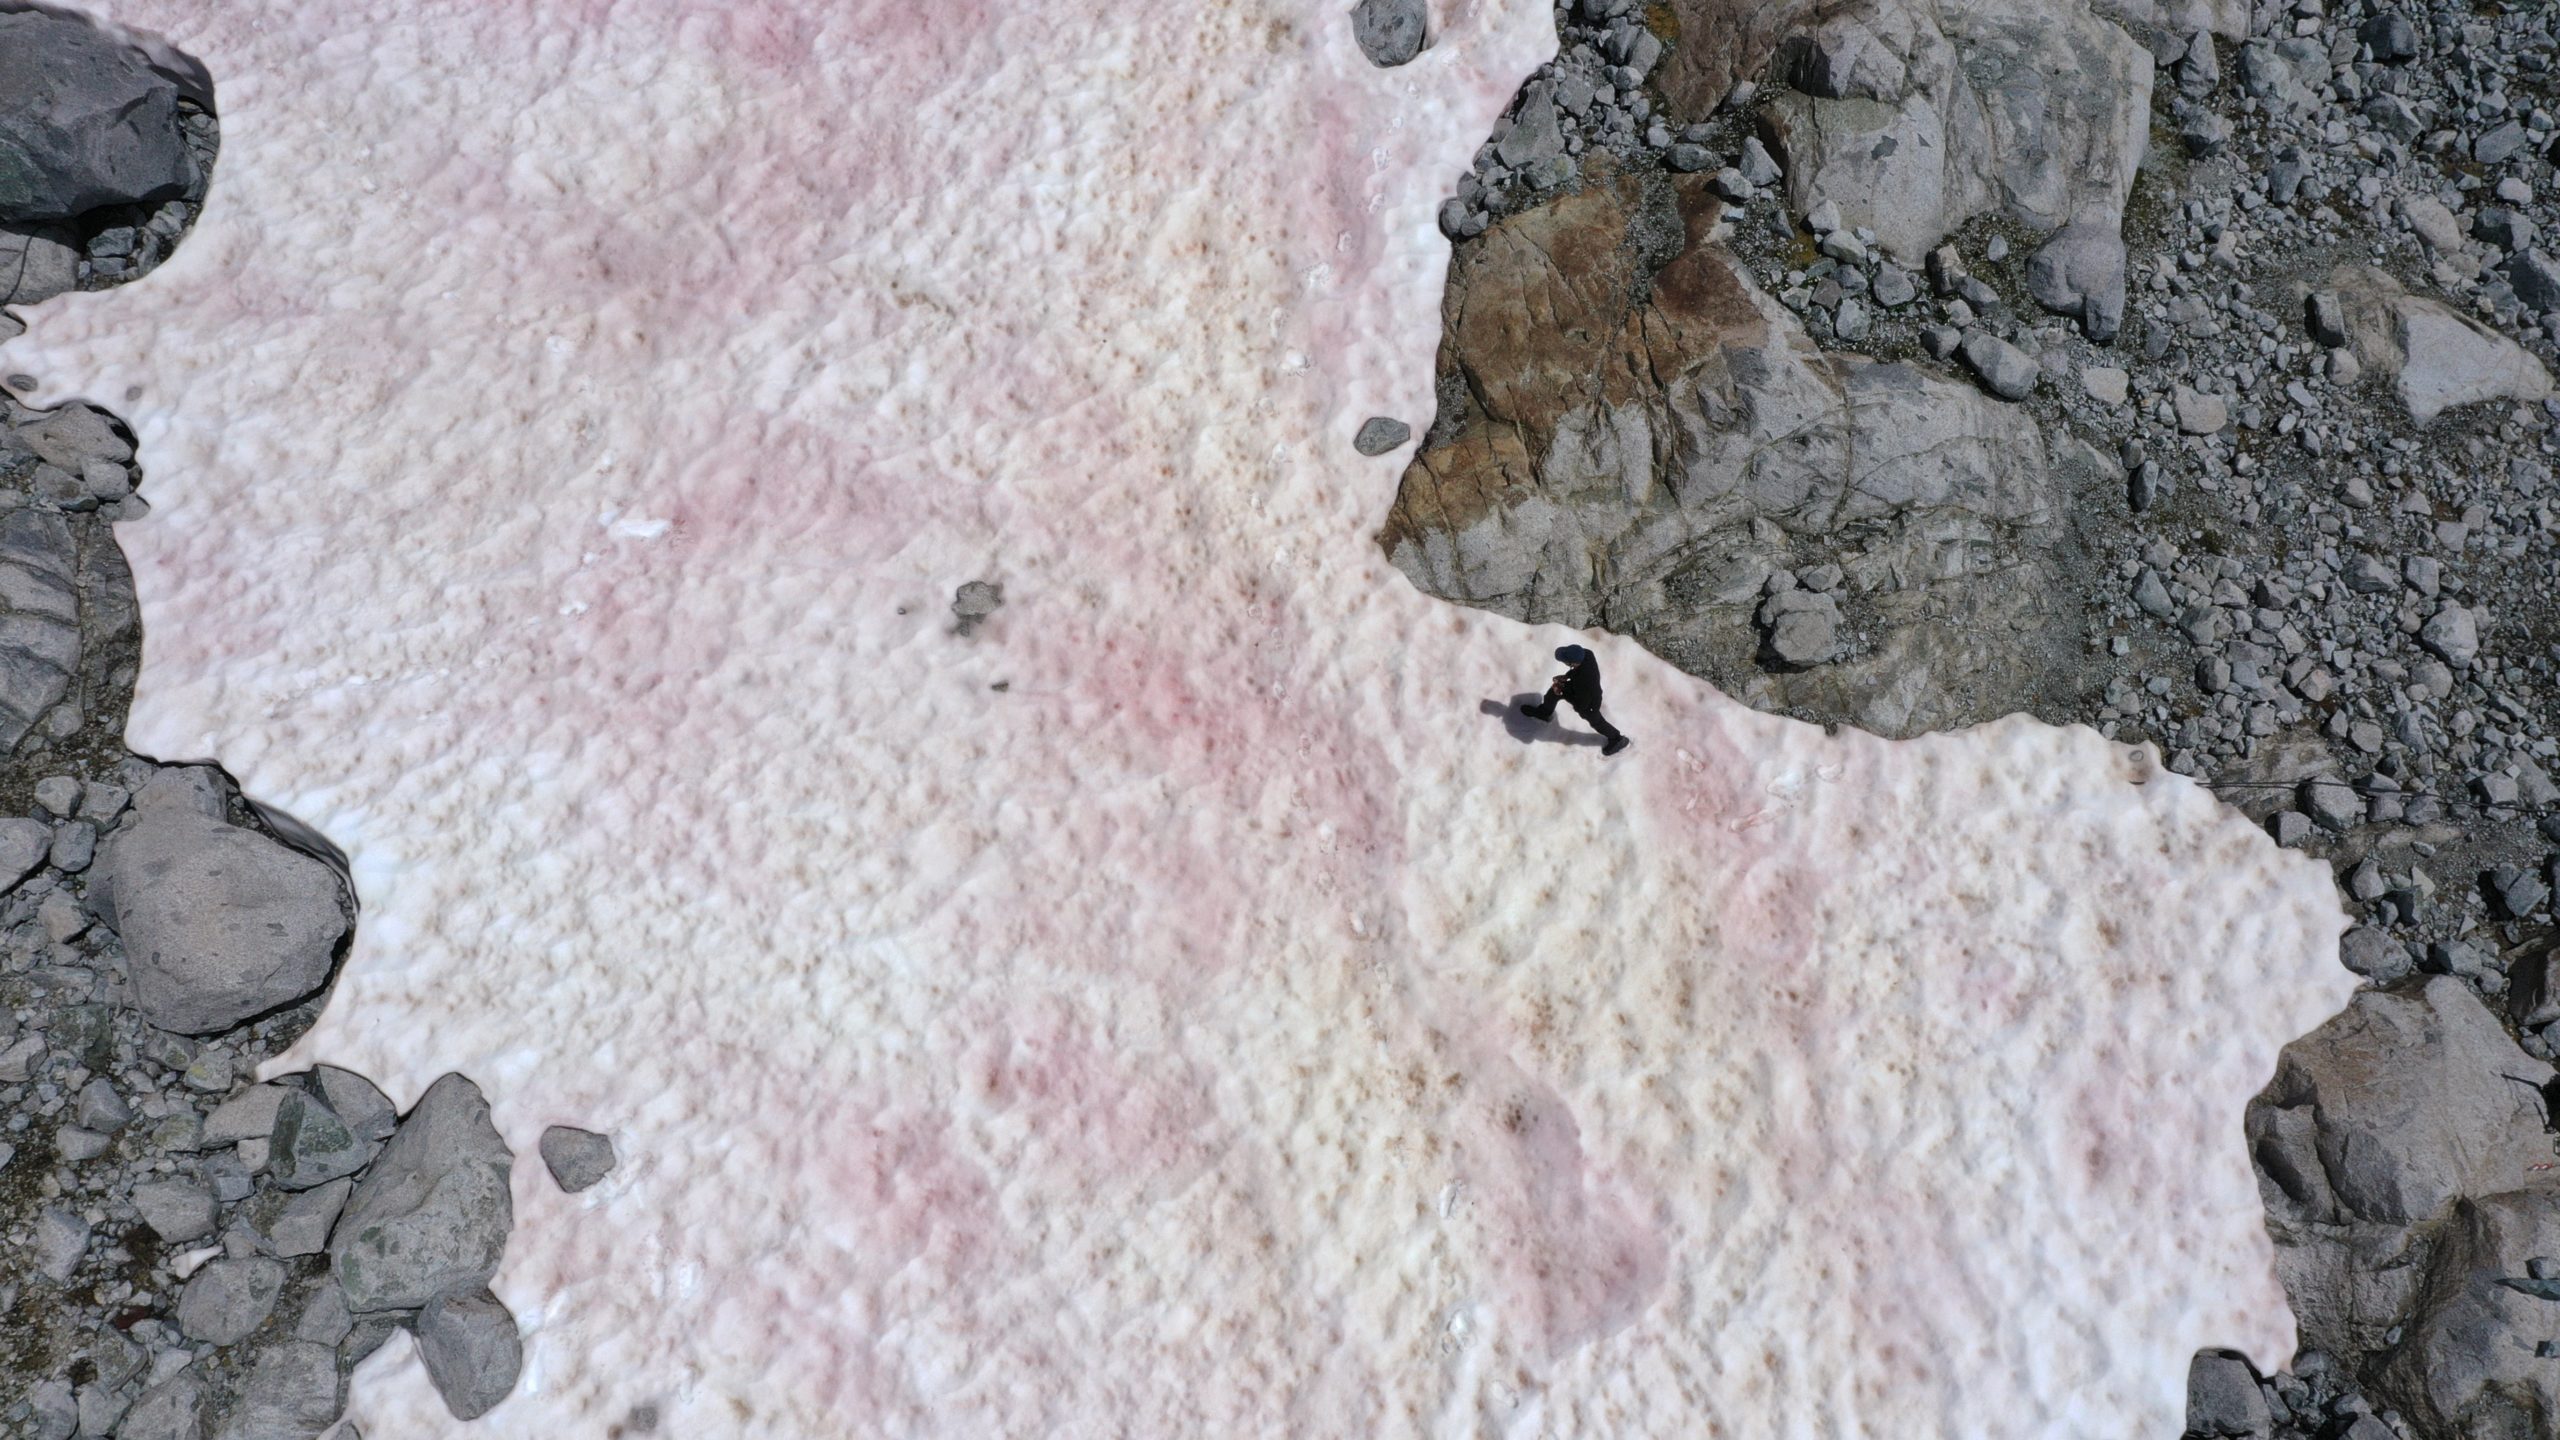 An aerial shot shows someone walking over the pink snow atop the Italian Alps on July 3, 2020. (Photo: Miguel Medina / AFP, Getty Images)